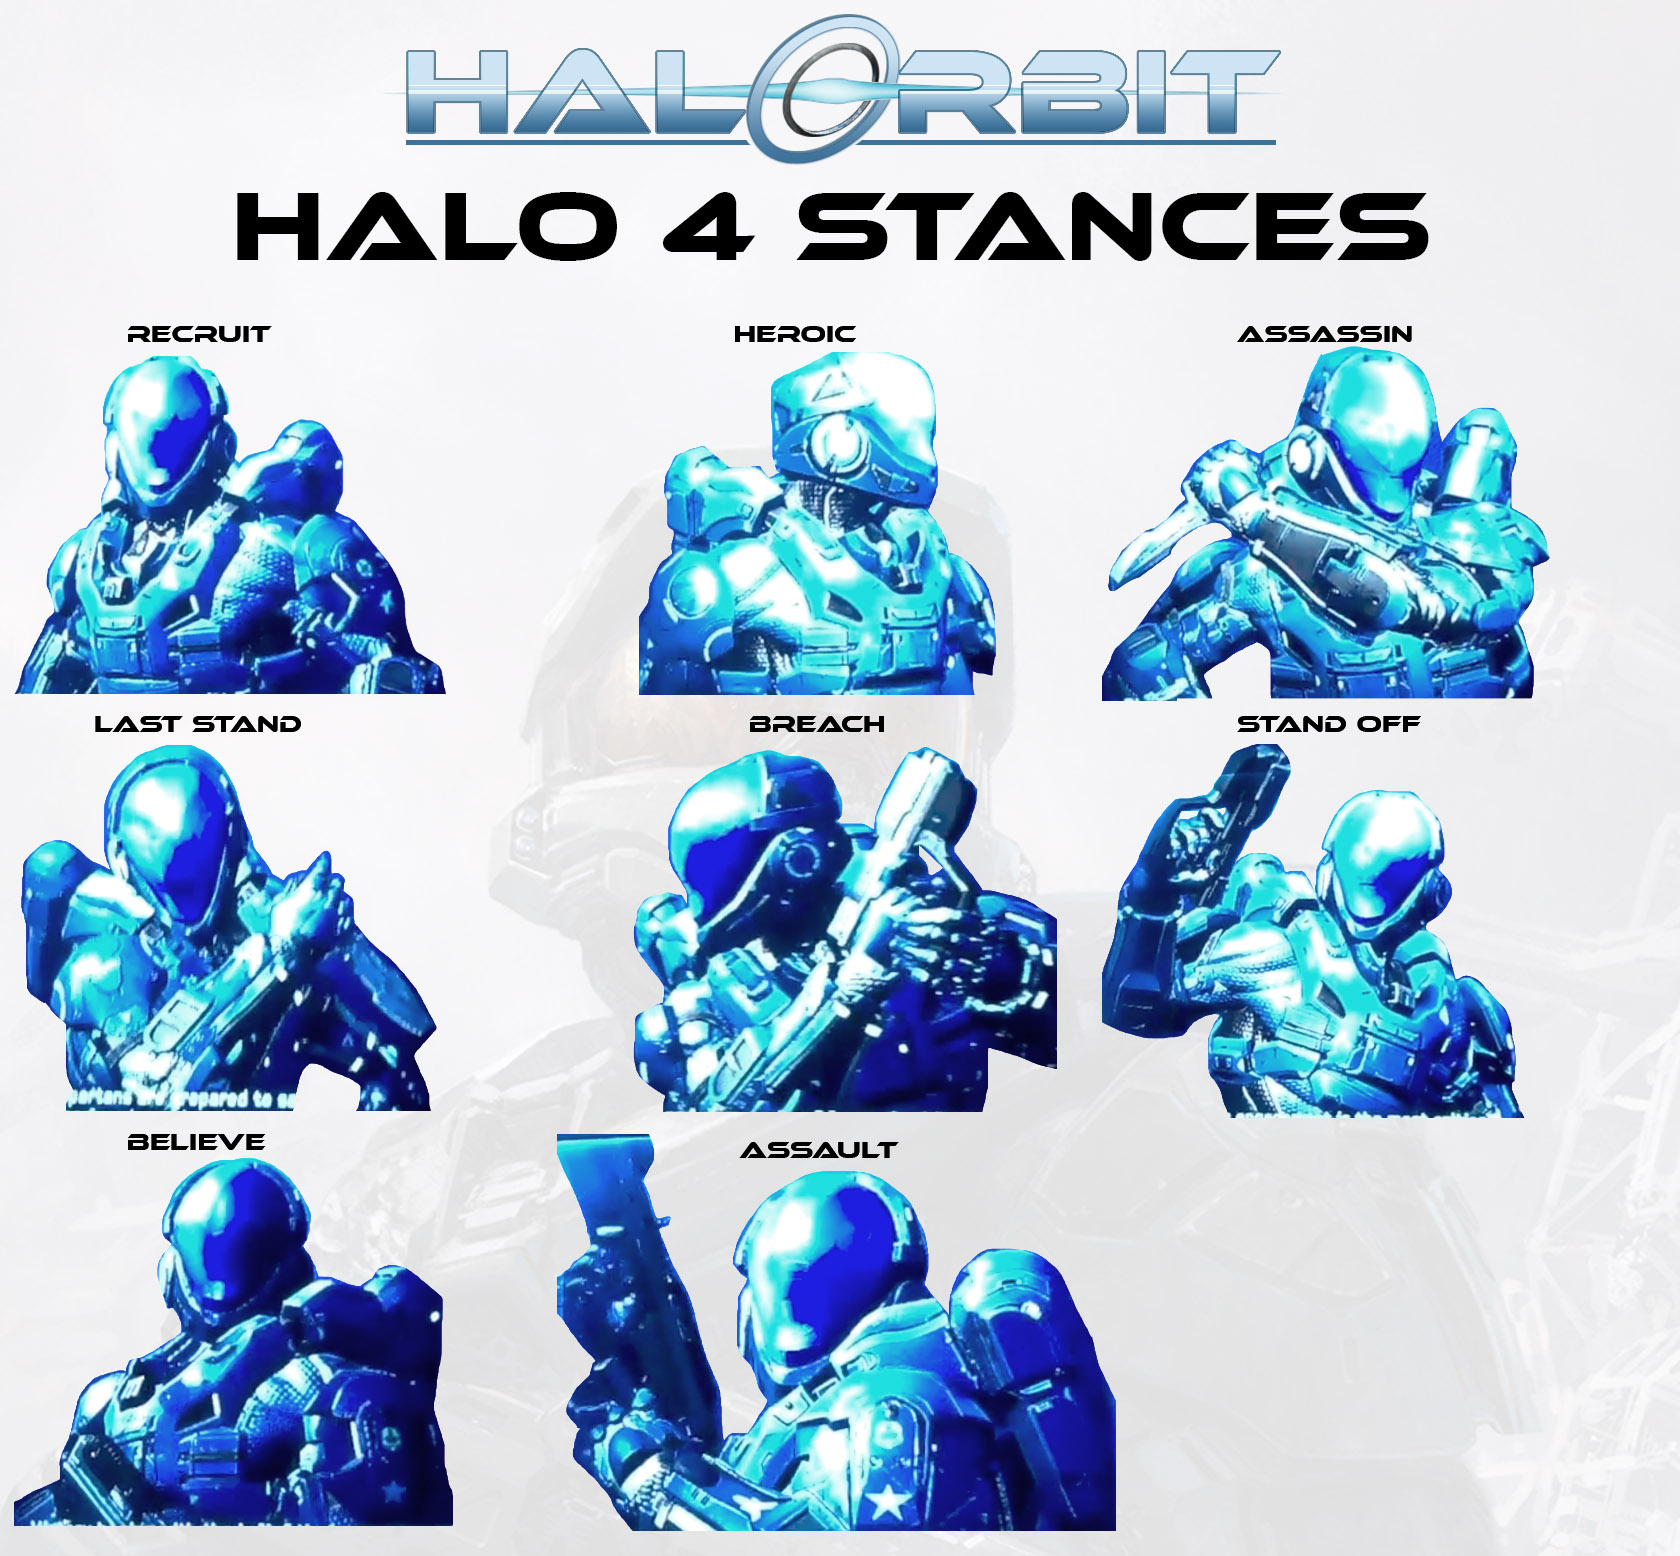 How to unlock stances in Halo 4